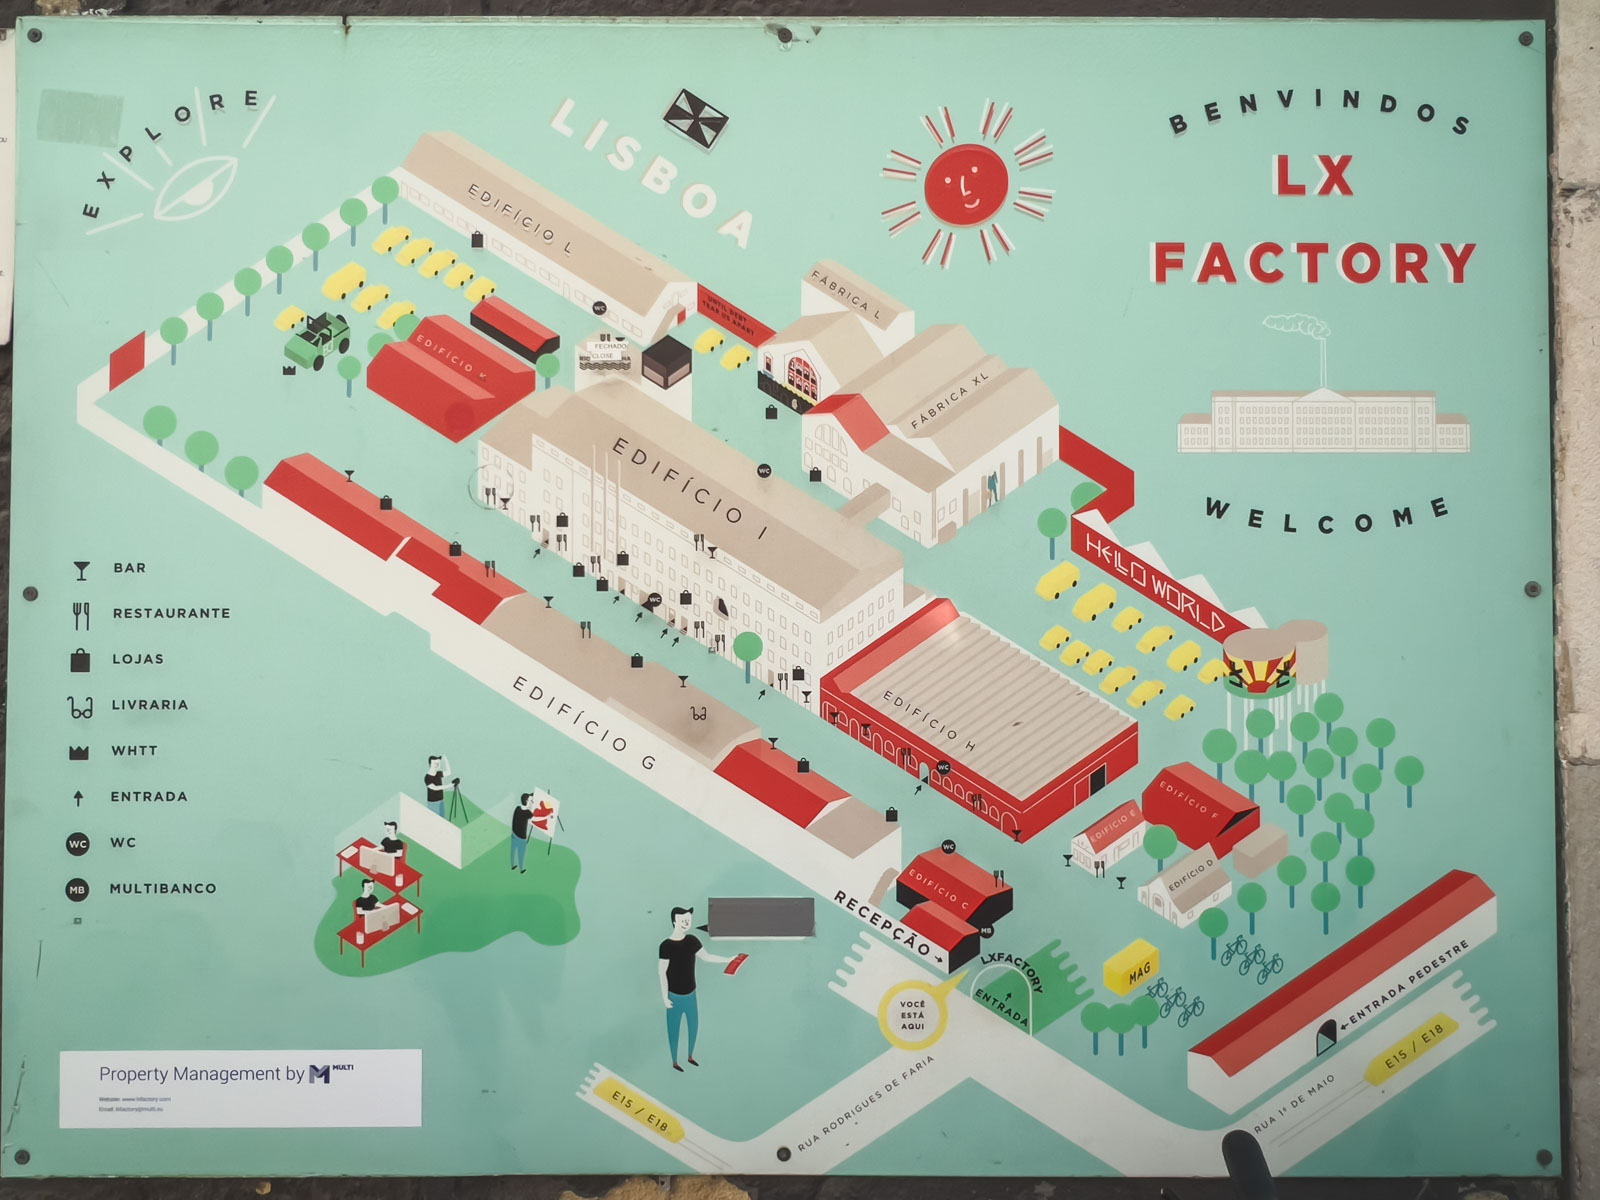 LX Factory Map in Lisbon, Portugal